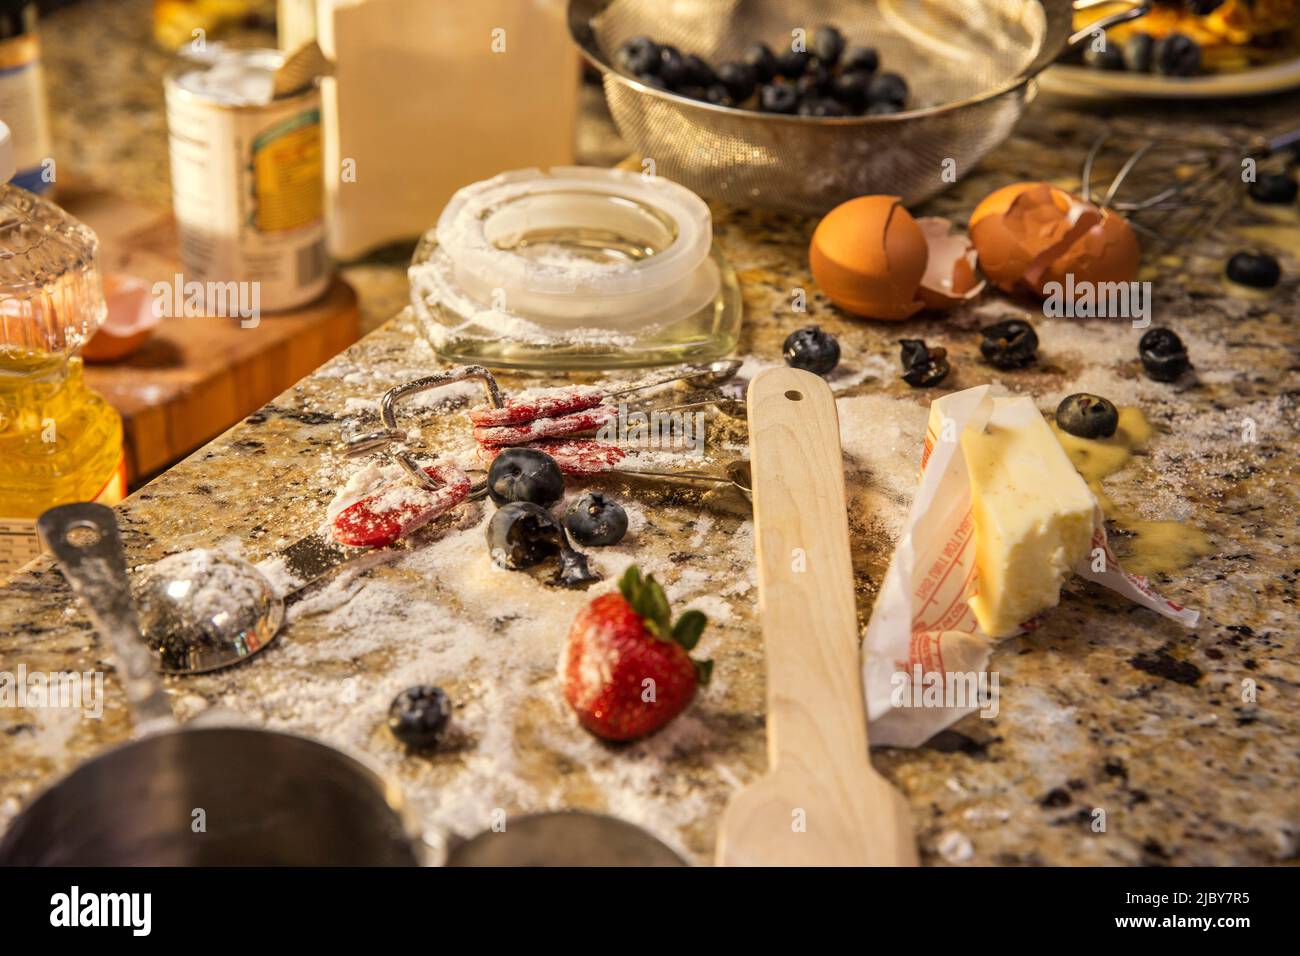 Messy kitchen counter after making blueberry pancakes Stock Photo